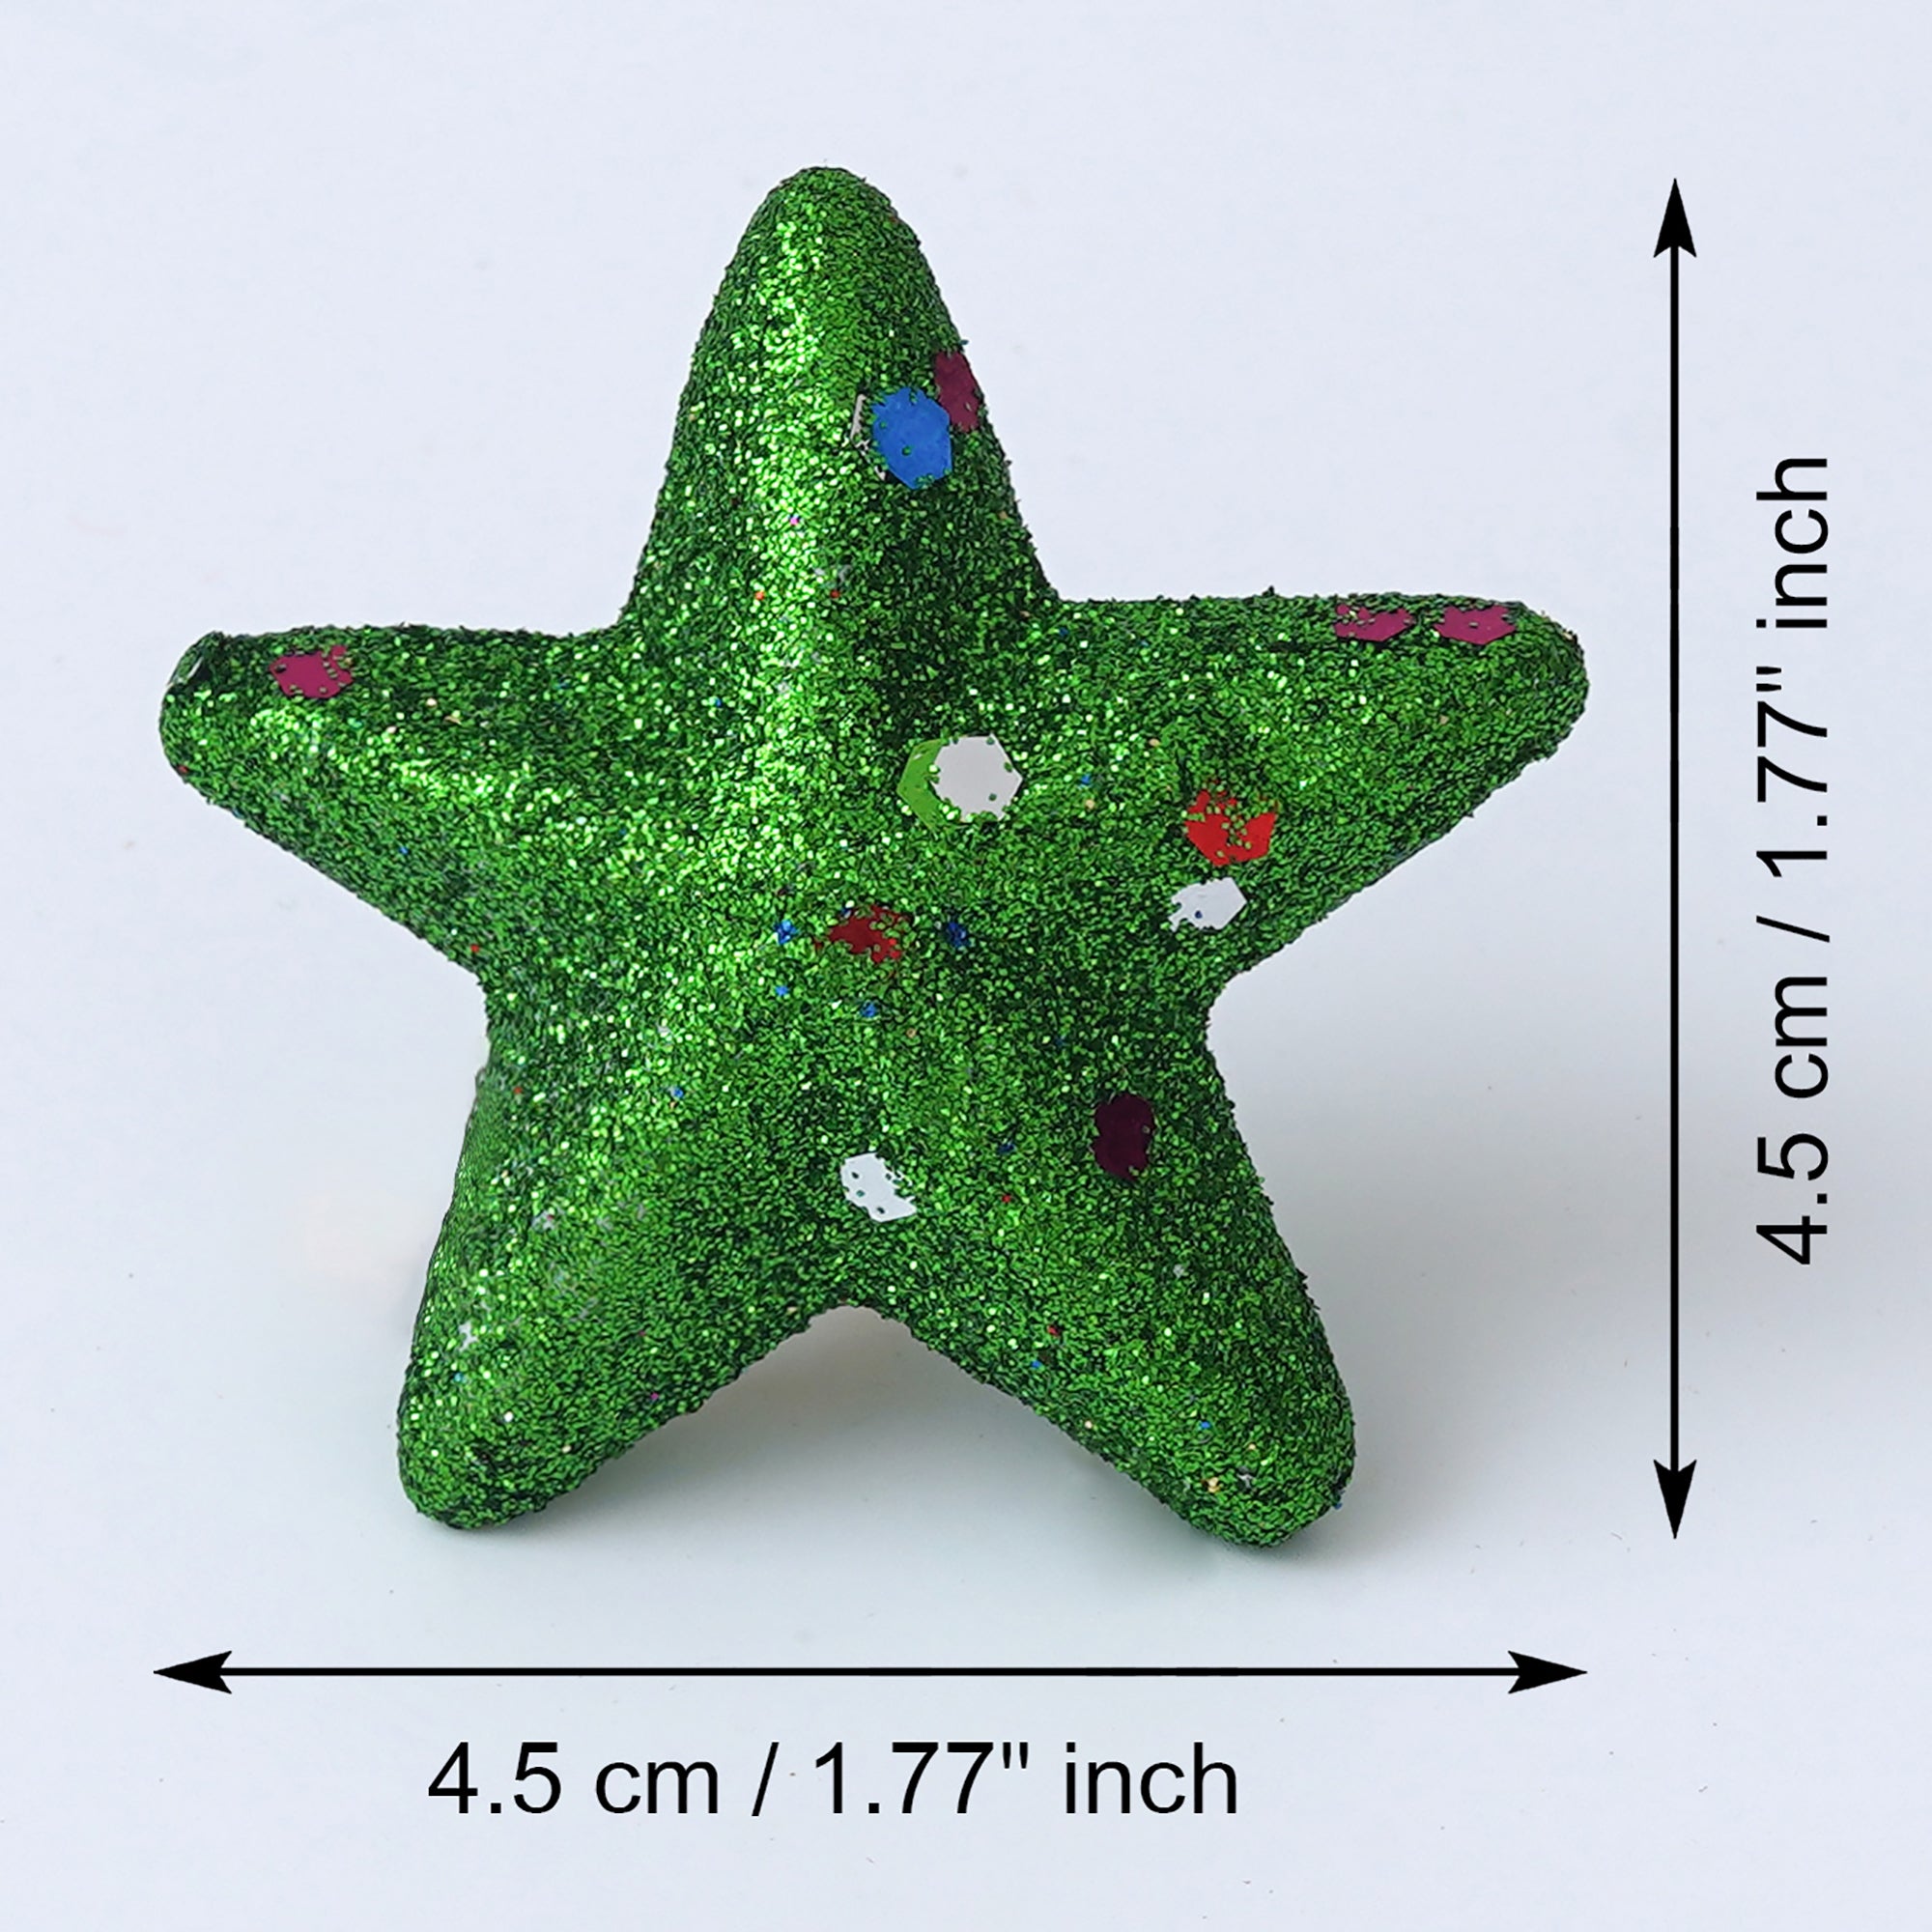 eCraftIndia Multicolor Glittering Xmas Stars for Decorating Christmas Tree and Hanging on Walls, Doors Set of 5 Pieces 3